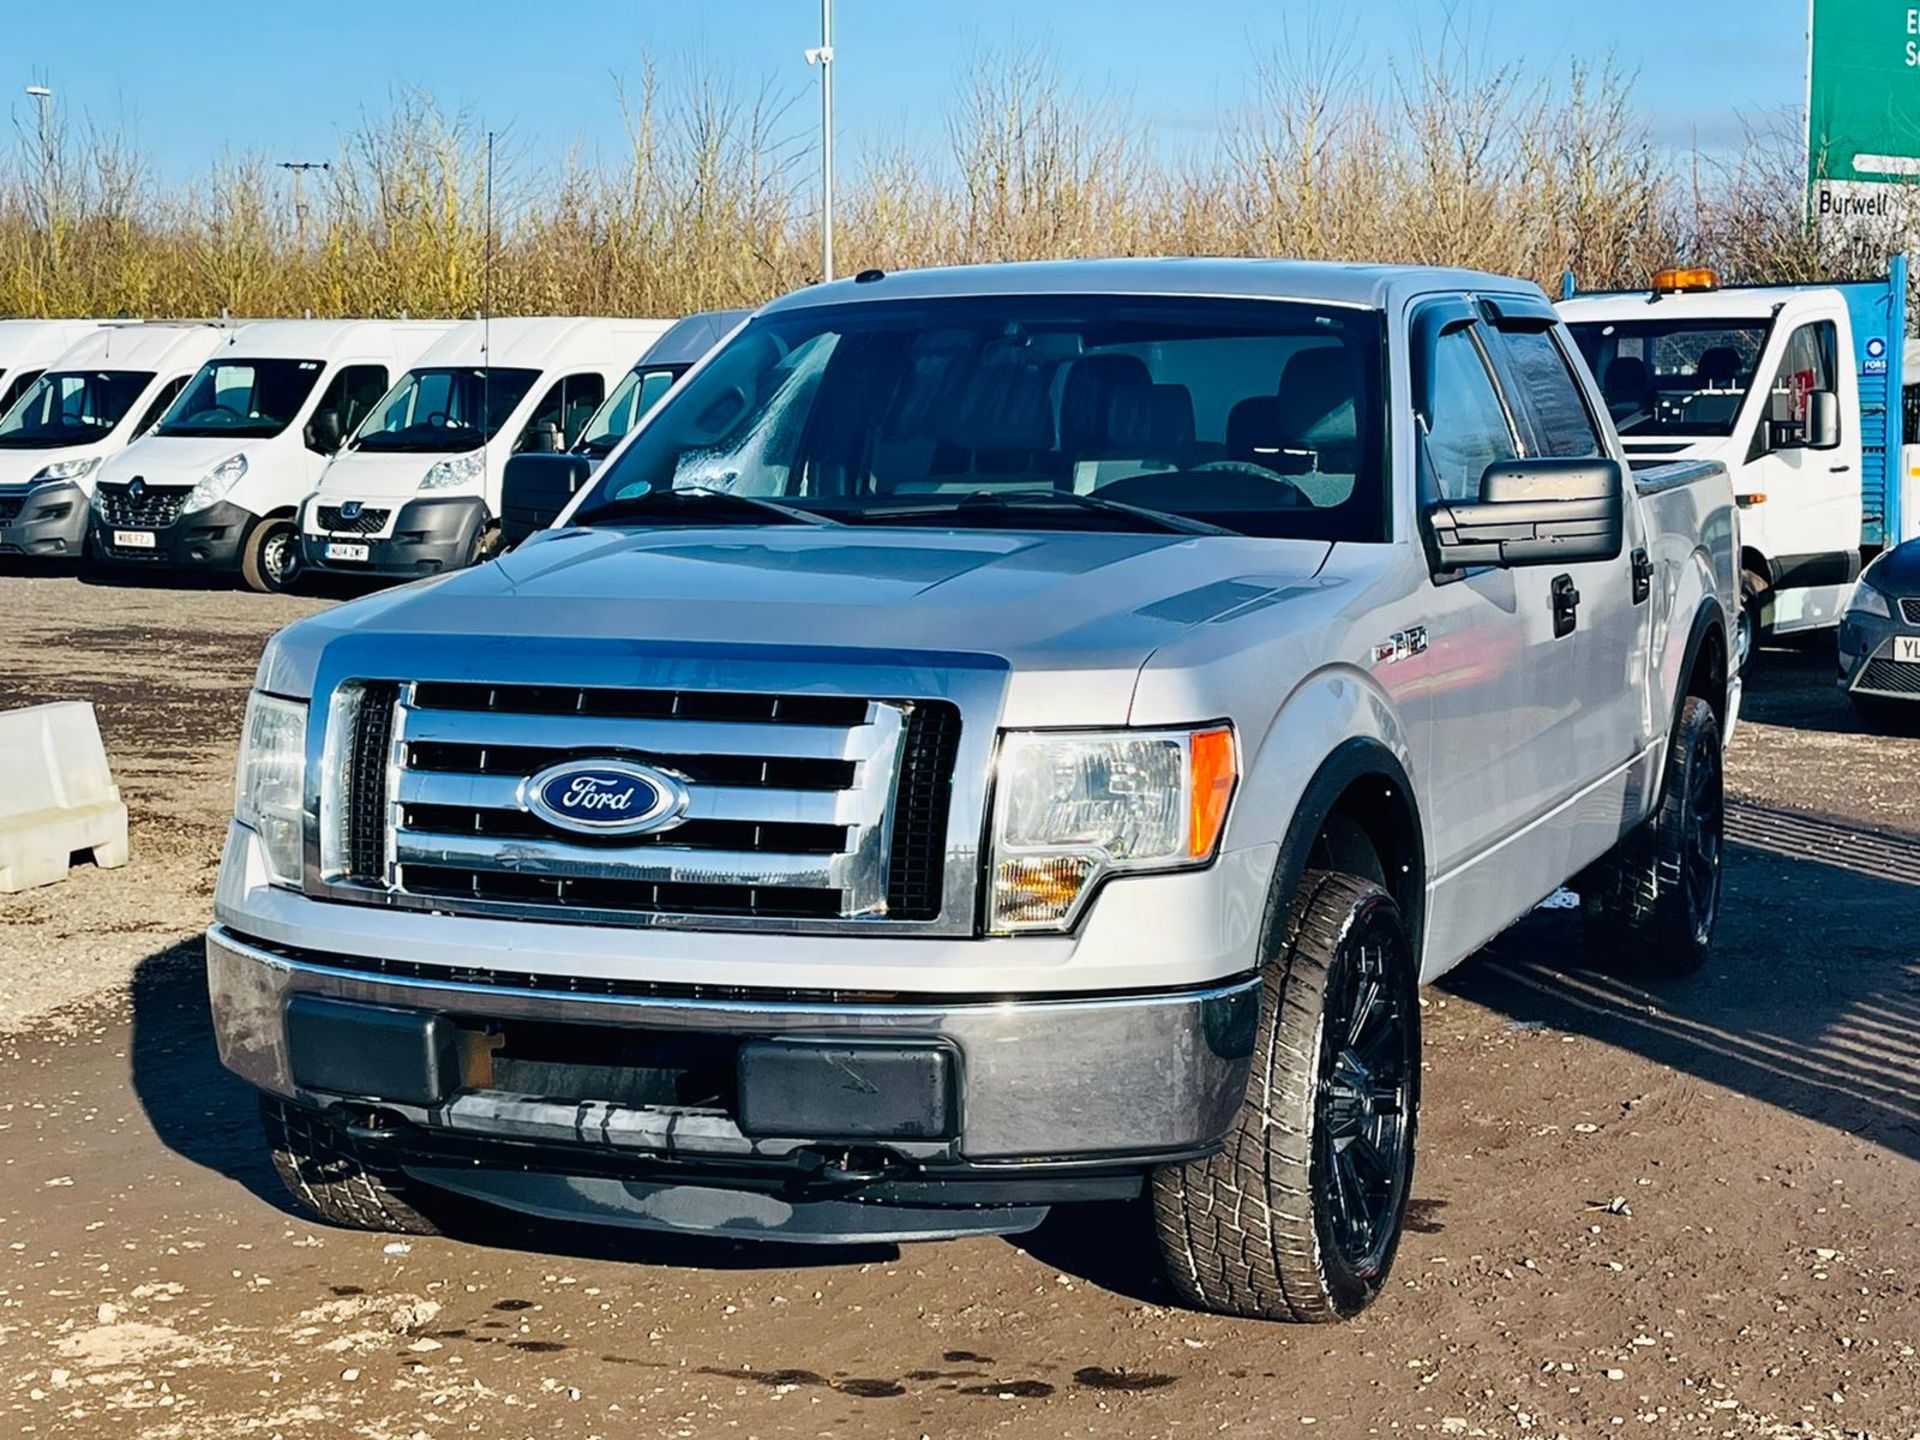 ** ON SALE ** Ford F-150 5.0L V8 XLT Edition 4WD Super-Crew '2011 Year' A/C - Cruise Control - ULEZ - Image 5 of 29